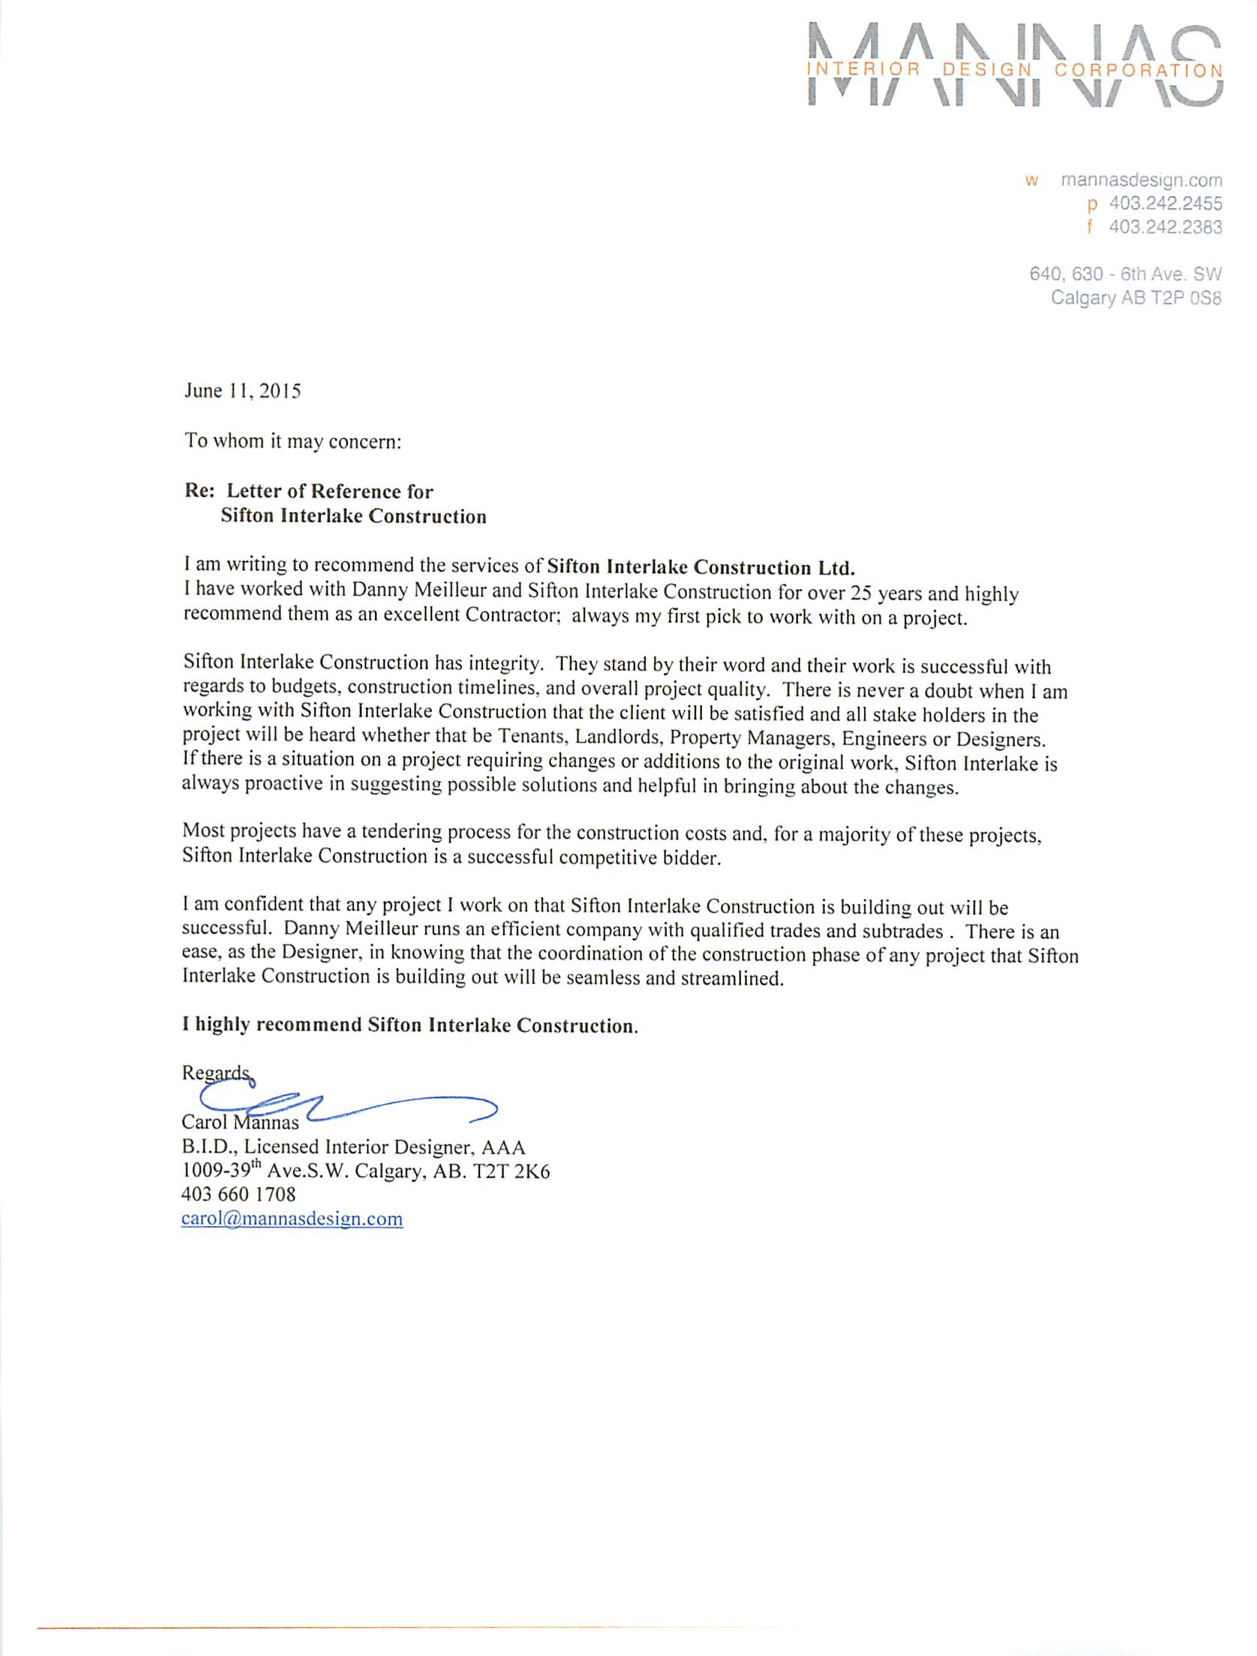 Mannas Interior Design Corp Letter Of Reference Sifton